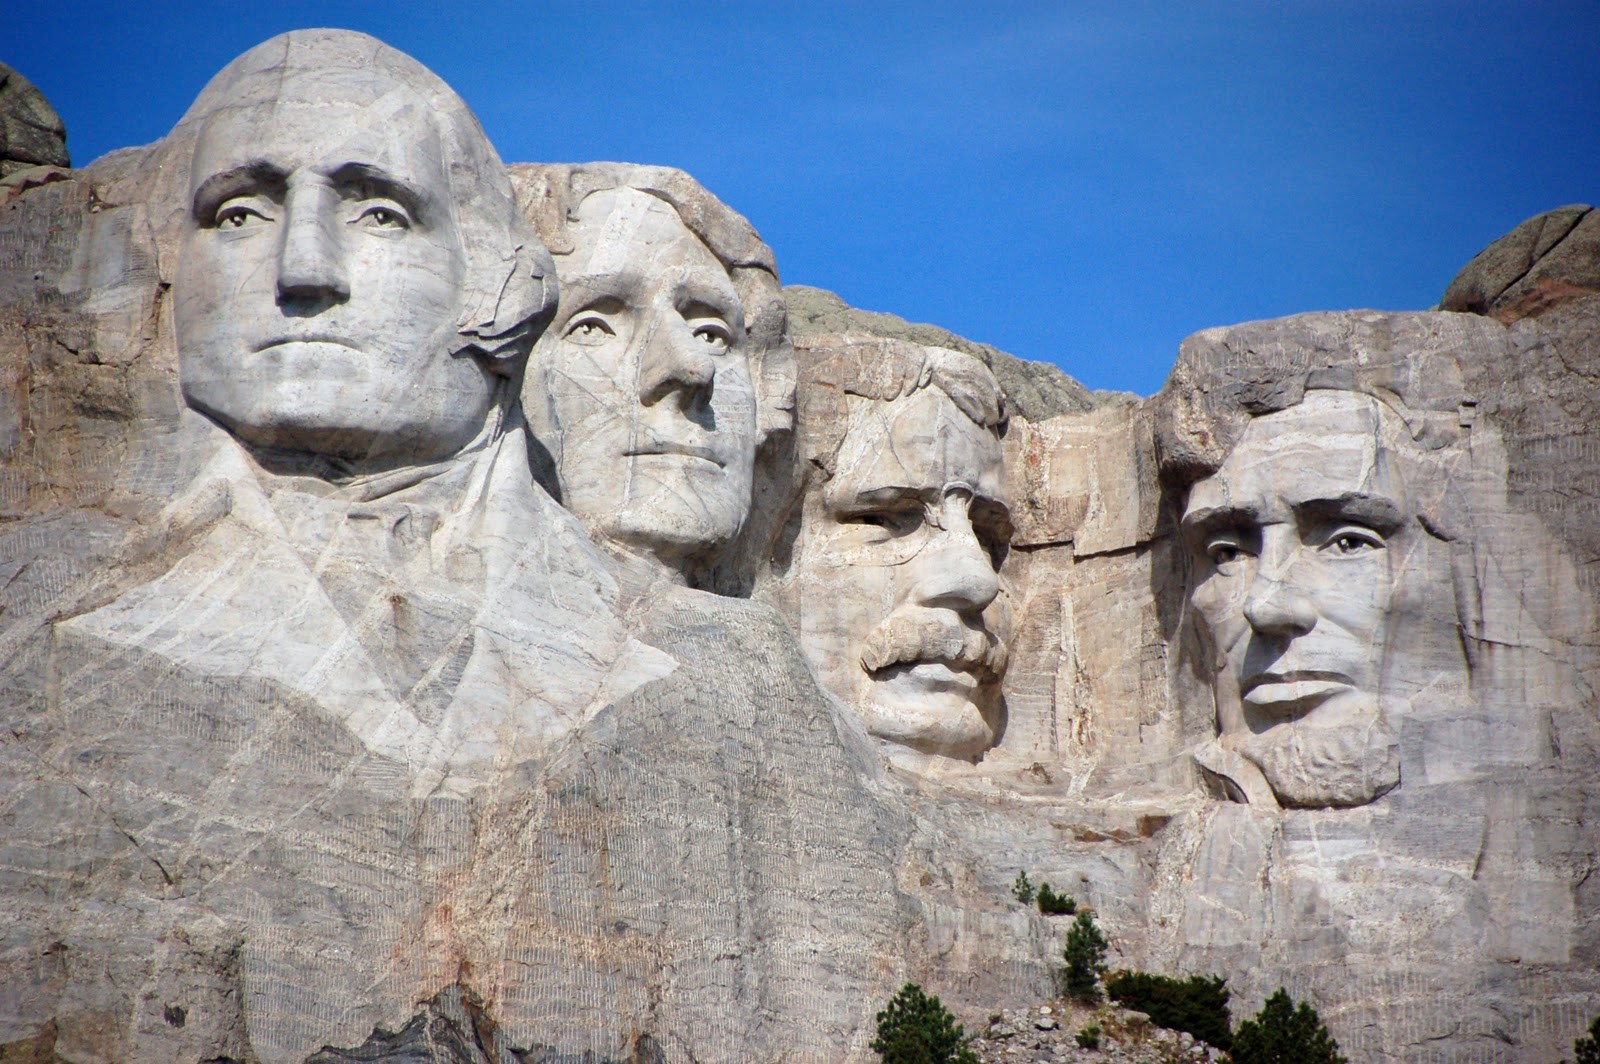 We’ll Honestly Be Impressed If You Score 17/22 on This General Knowledge Quiz Presidents Day, Mount Rushmore, South Dakota